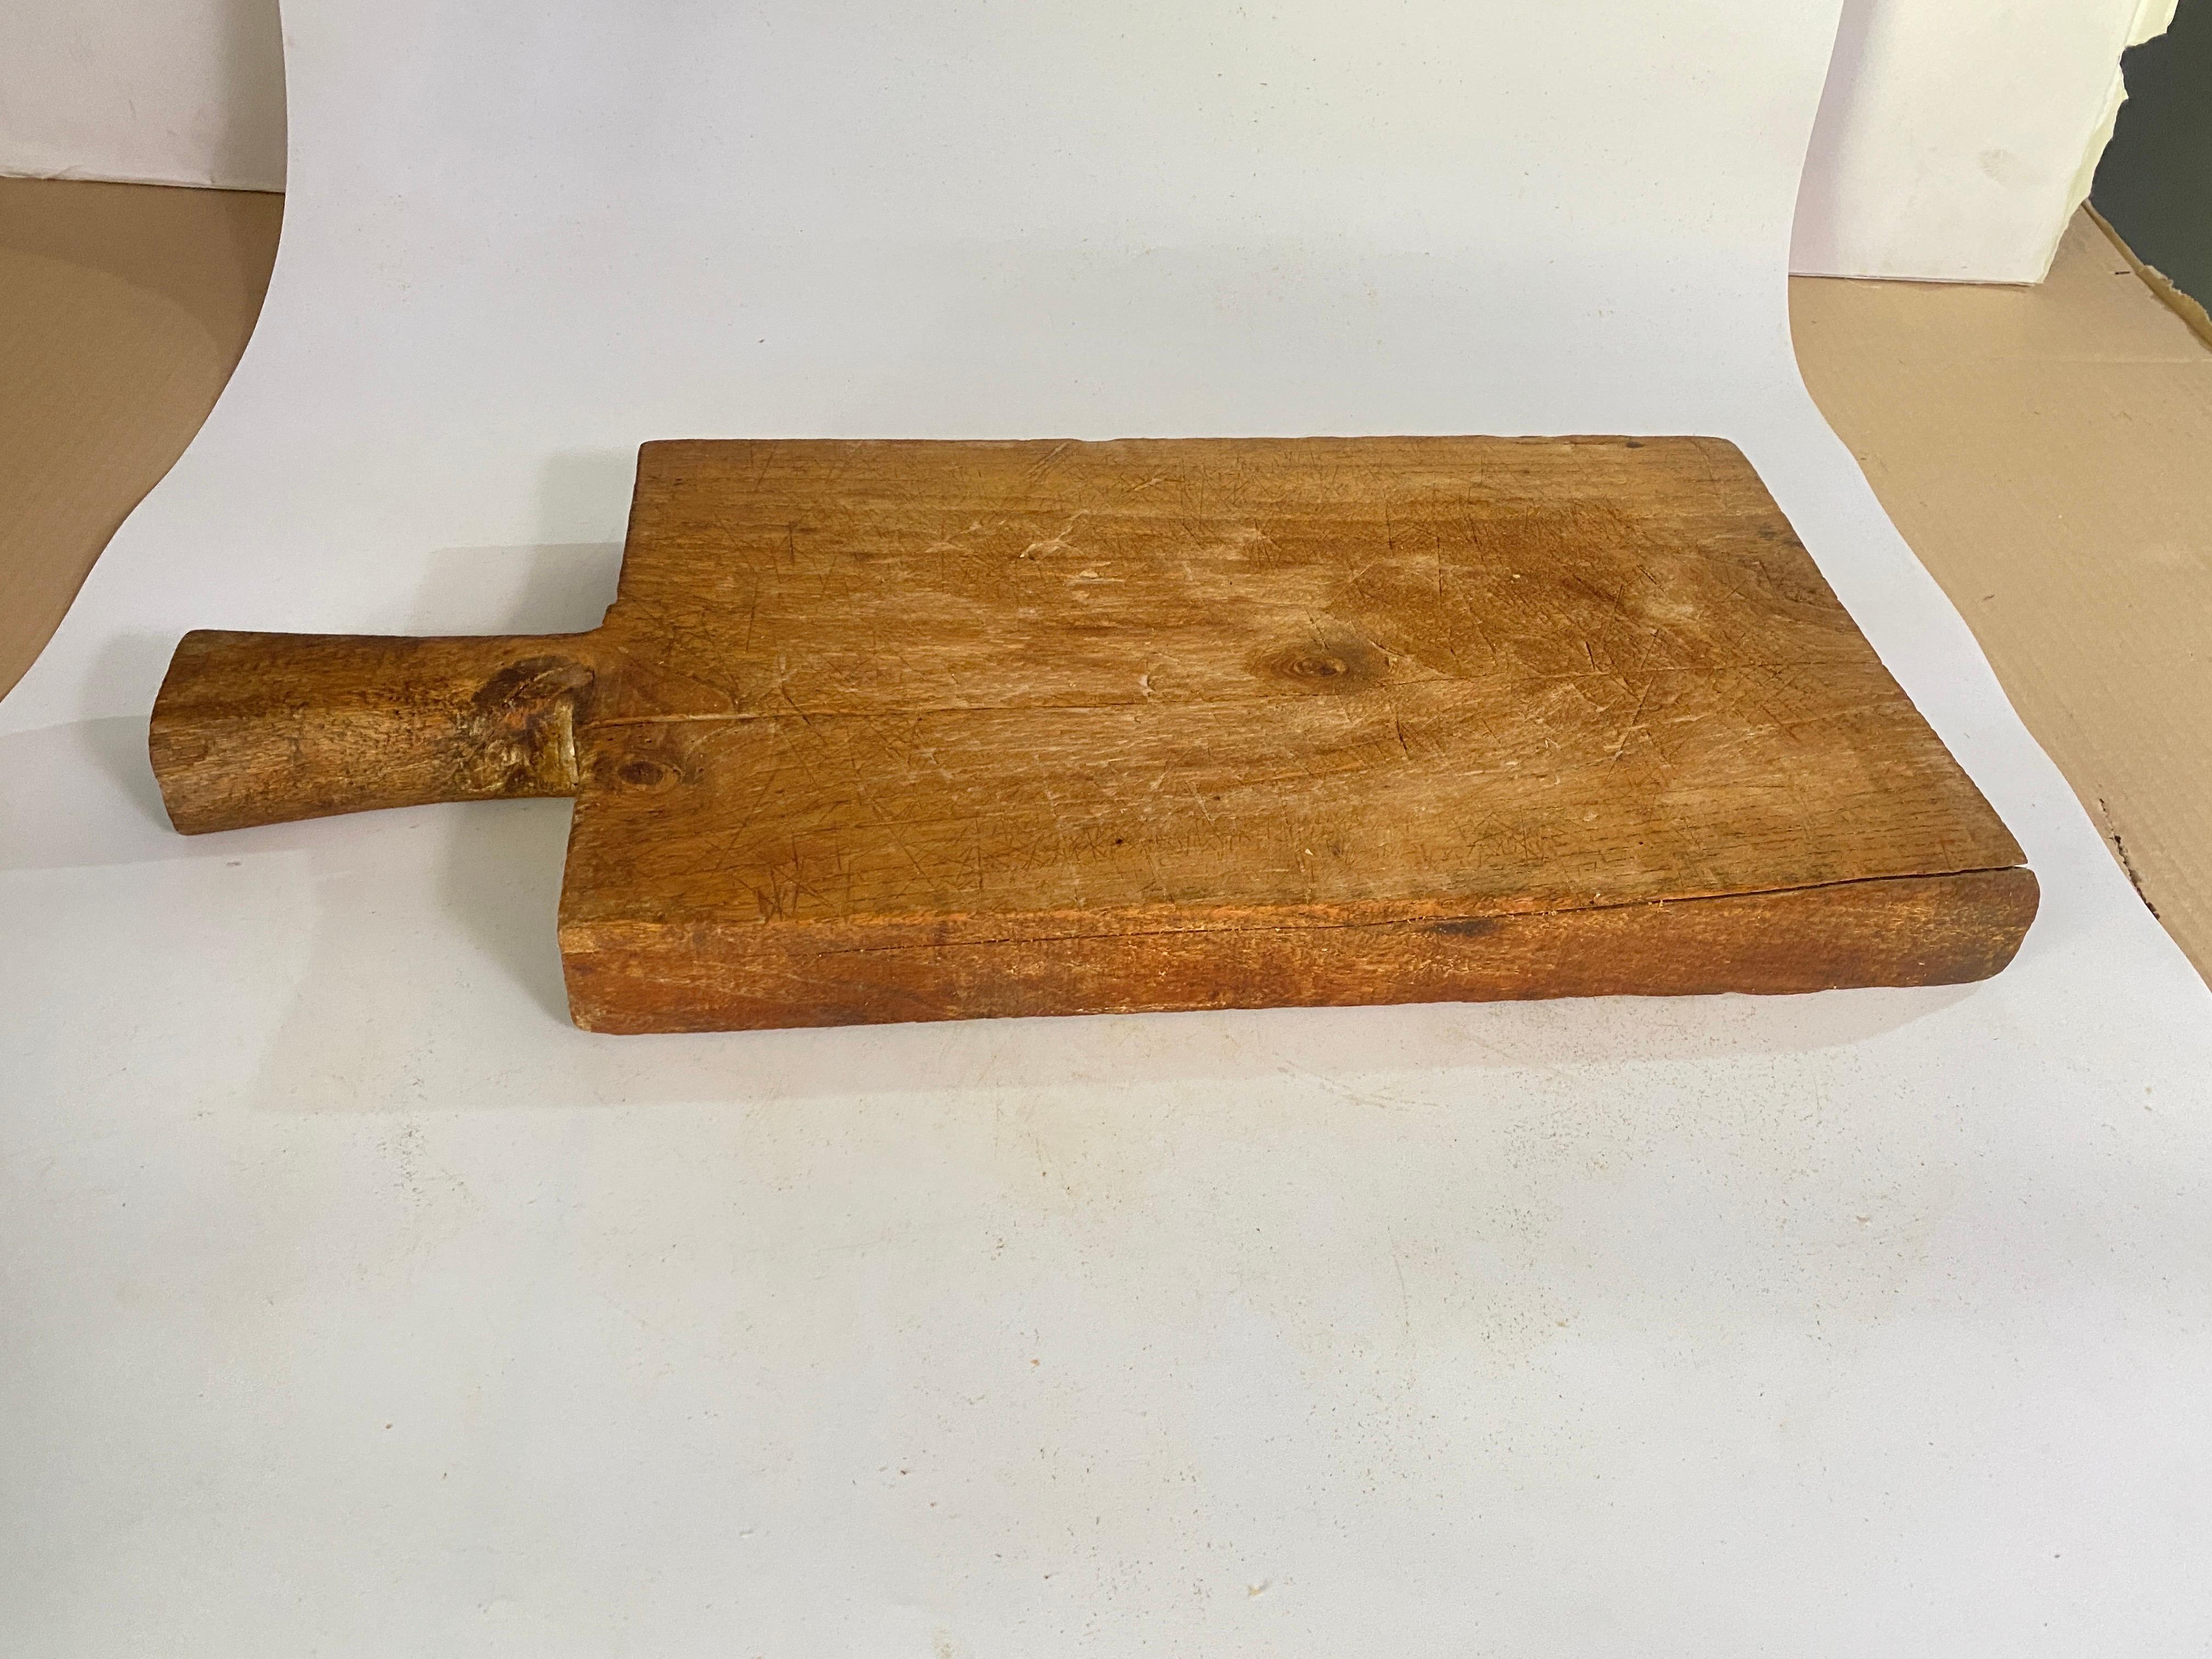 Large Wooden Chopping or Cutting Board Old Patina, Brown Color France 20th  For Sale 4